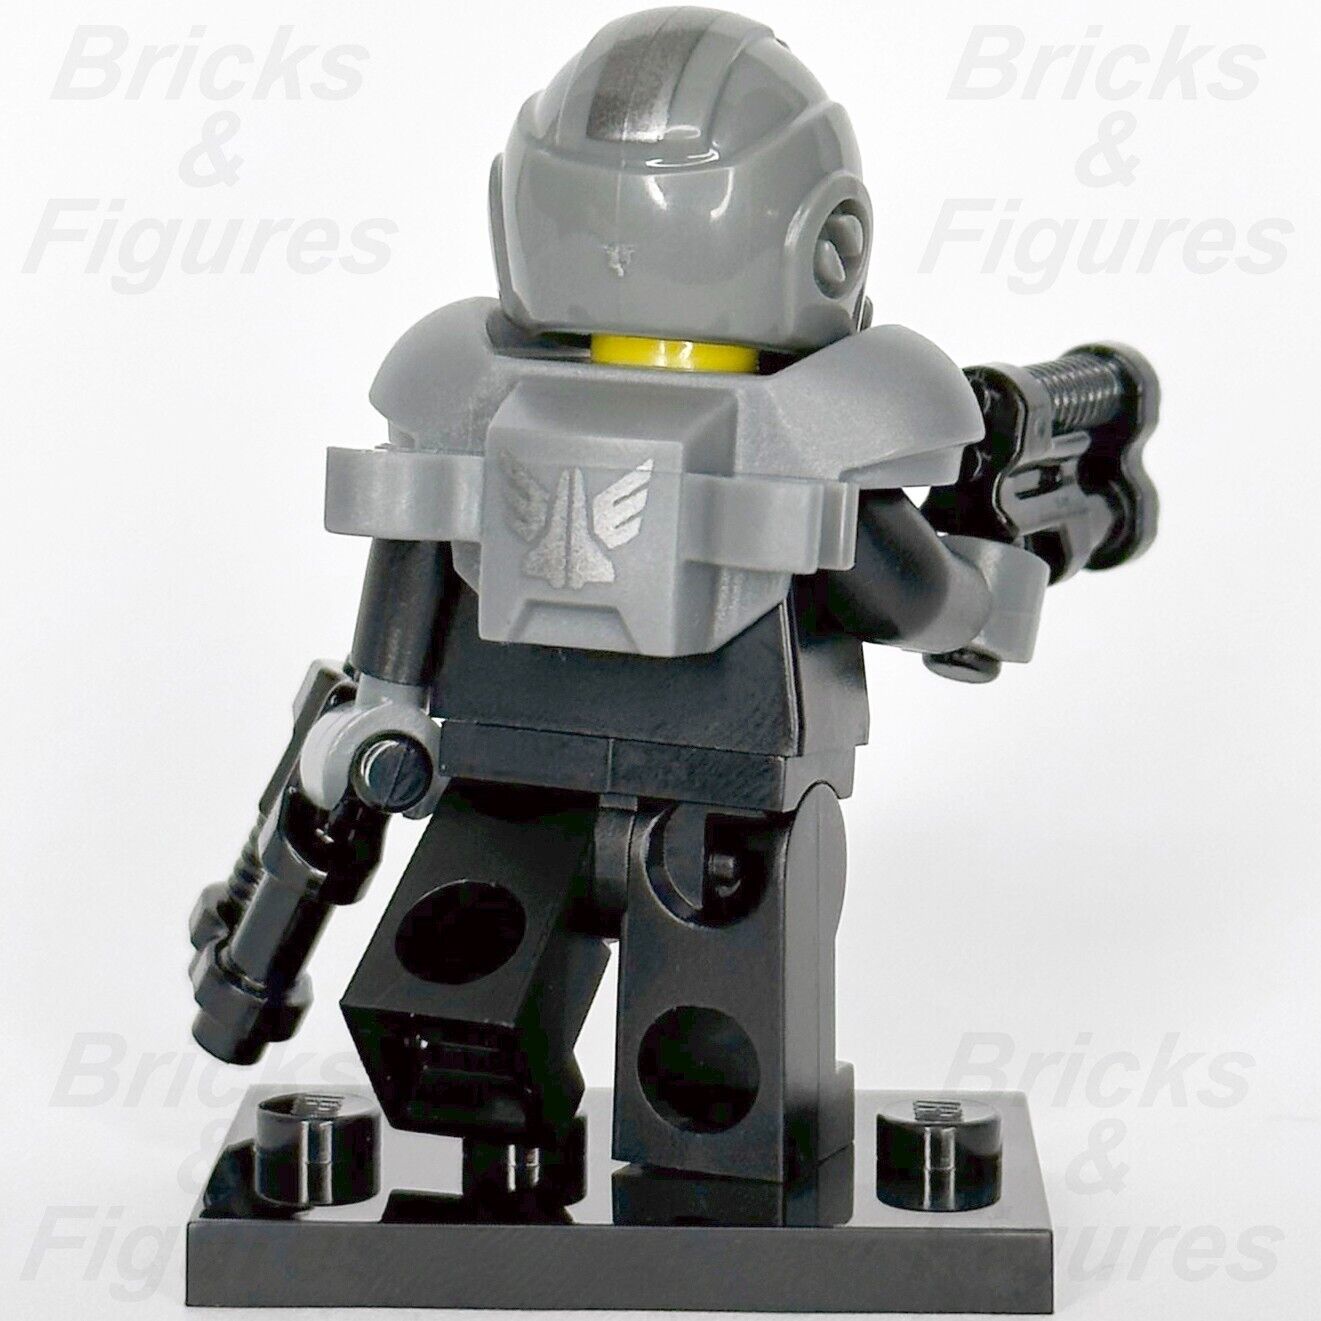 LEGO Galaxy Trooper Minifigure Soldier Collectible Series 13 71008 col13-16 #16 - Bricks & Figures